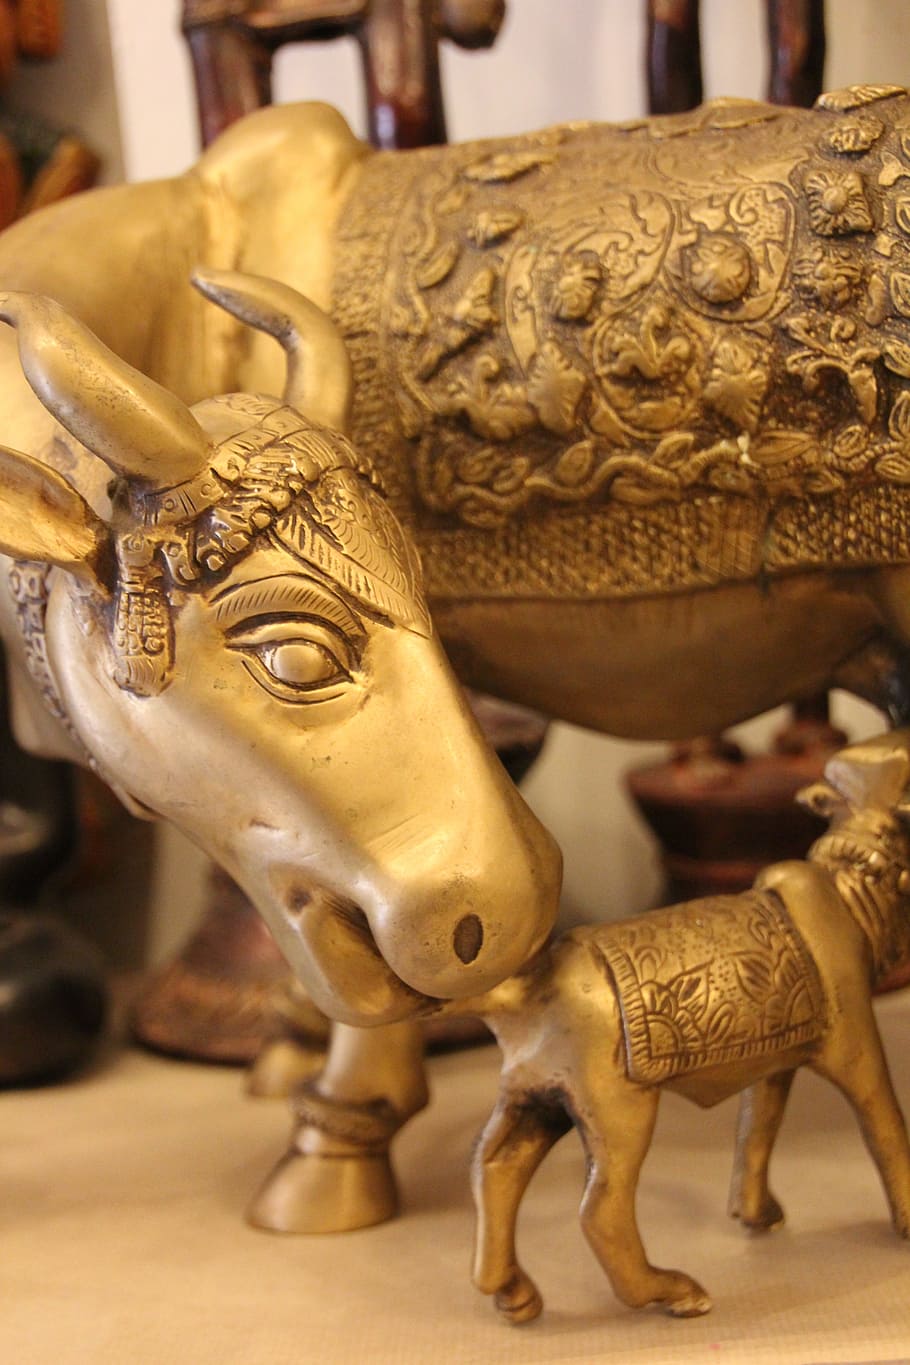 Cow, Brass, Sculpture, Bronze, statue, ornate, history, arts culture and entertainment